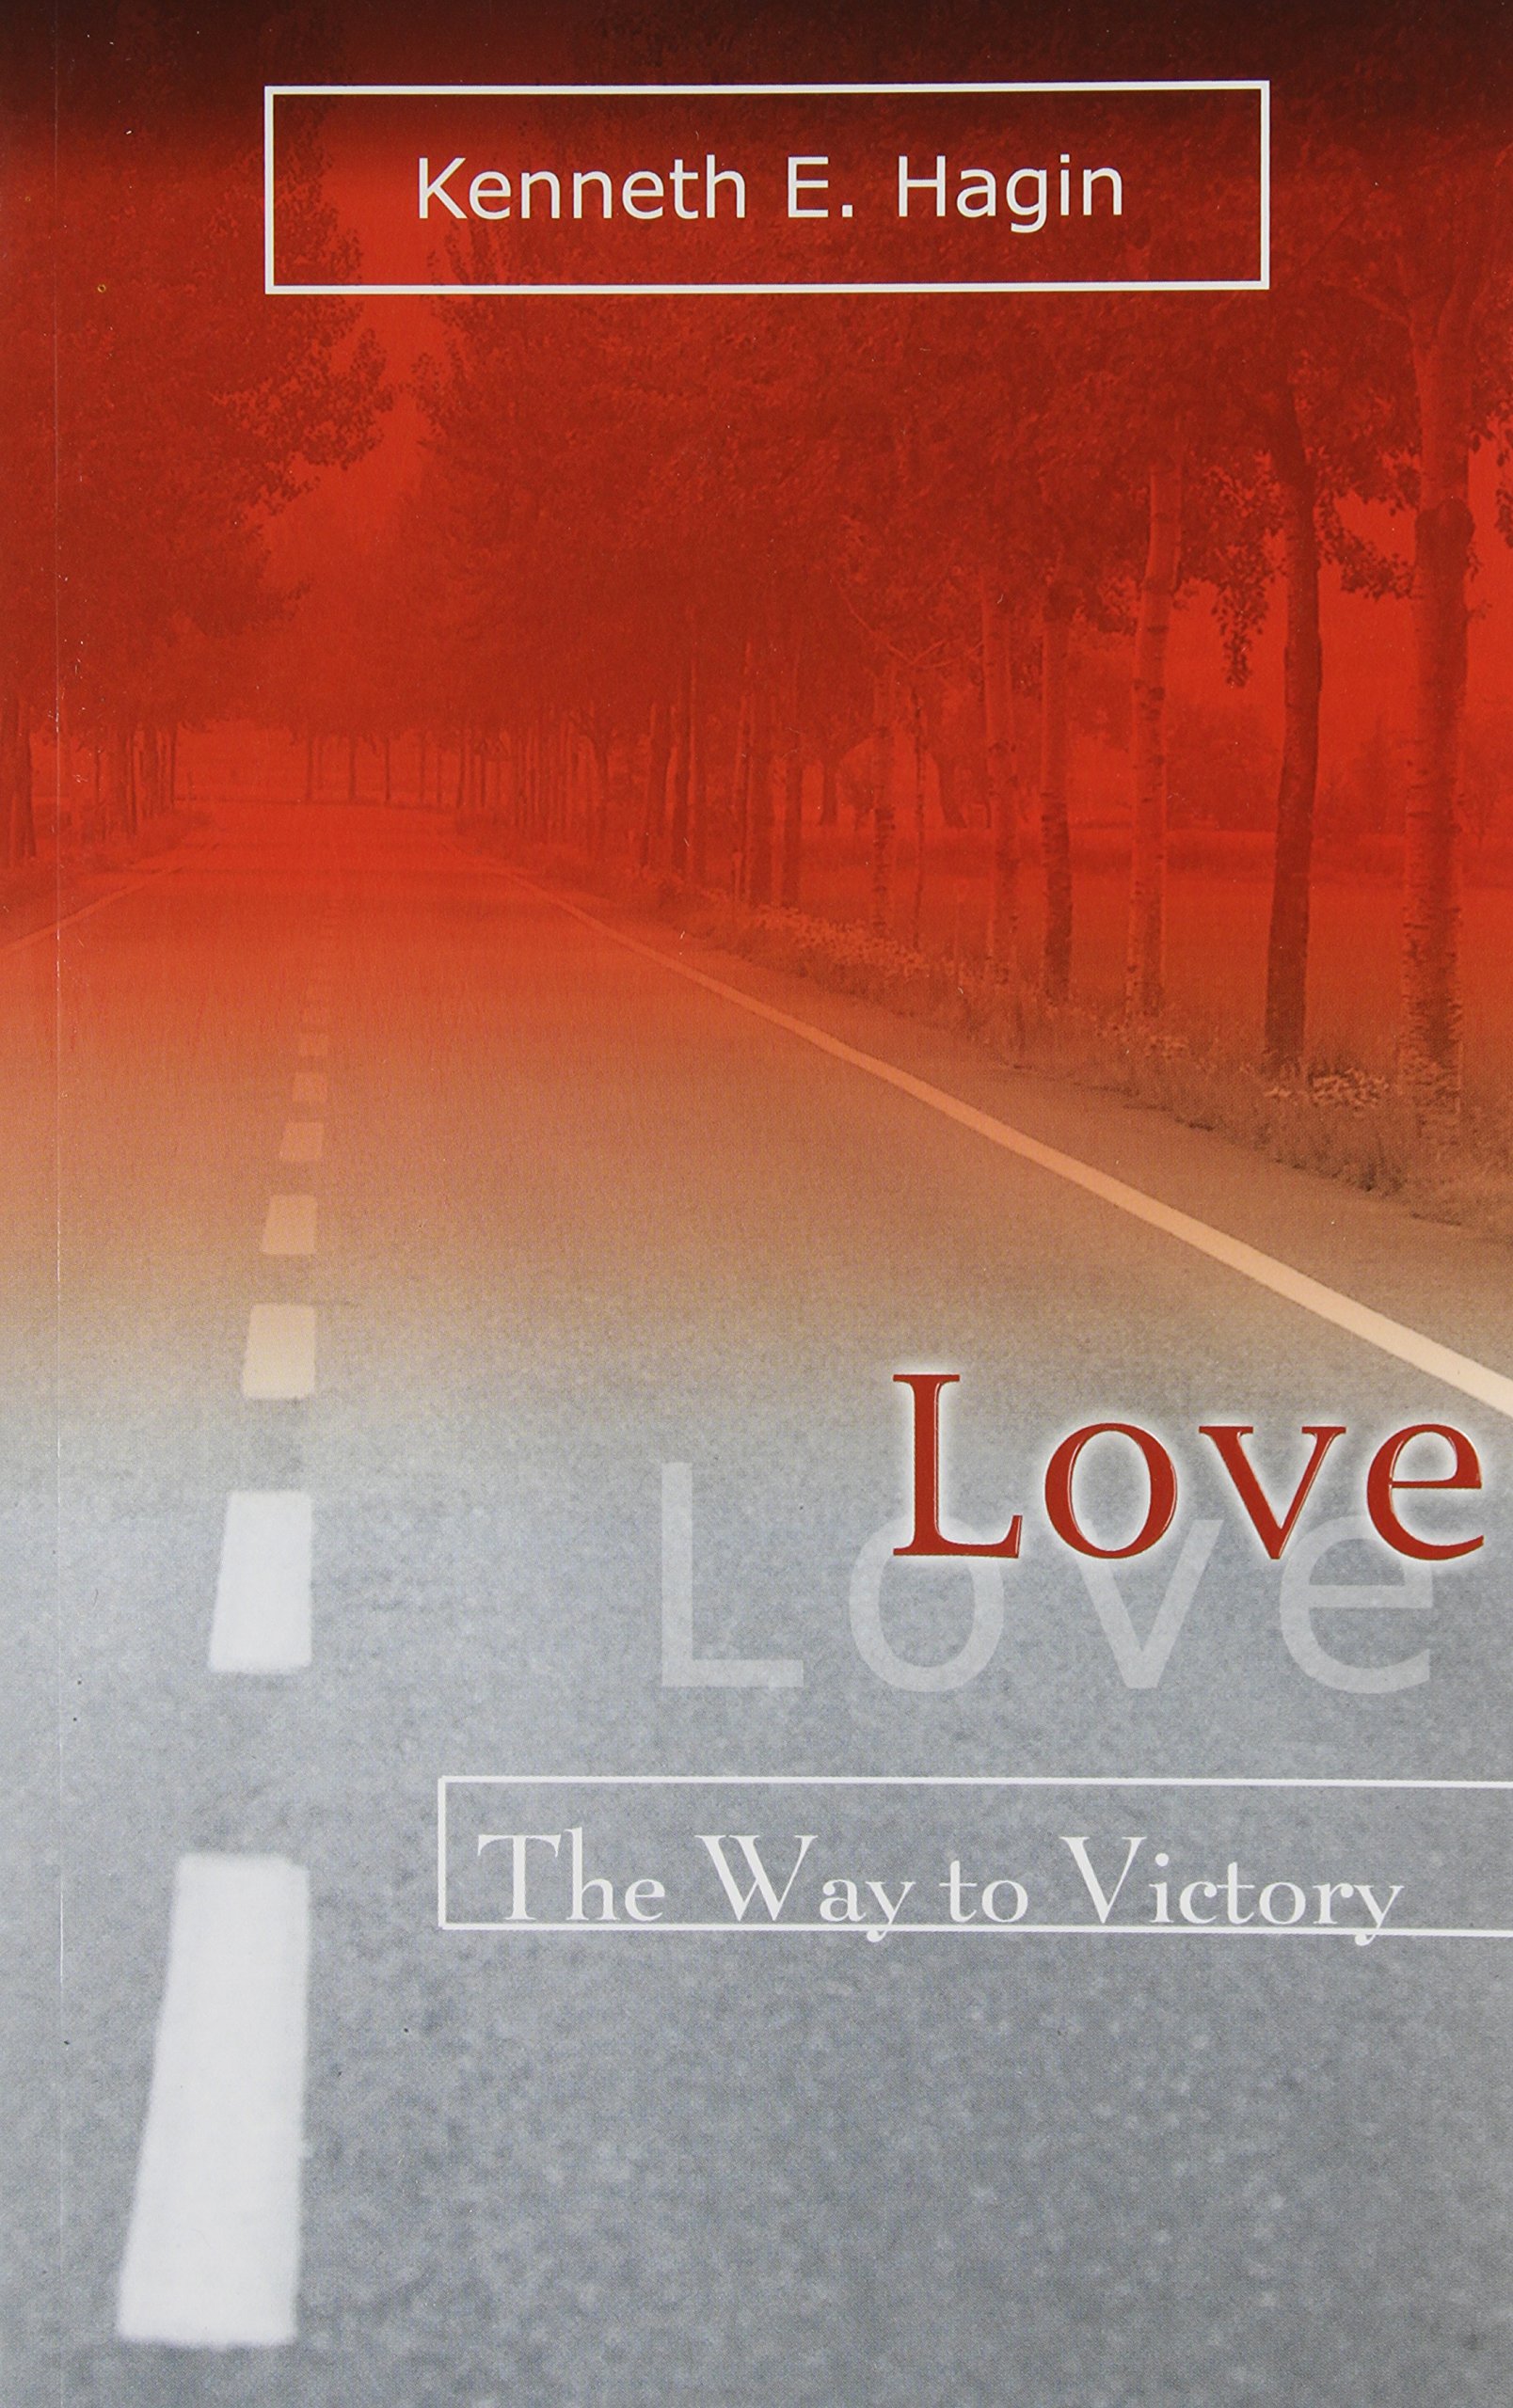 DOWNLOAD PDF: Love – The Way to Victory by Kenneth Hagin 17